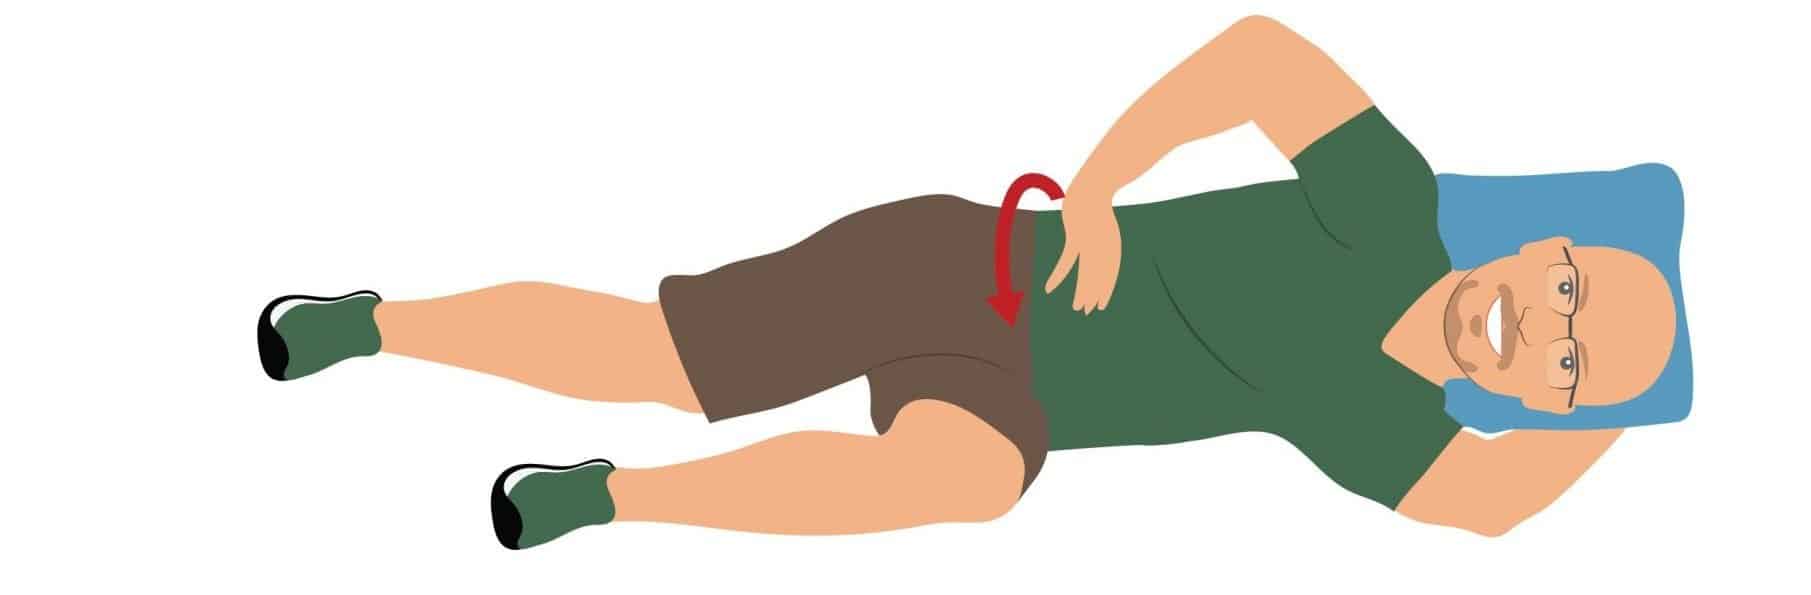 Hip opener exercise is excellent for back pain caused by golfing